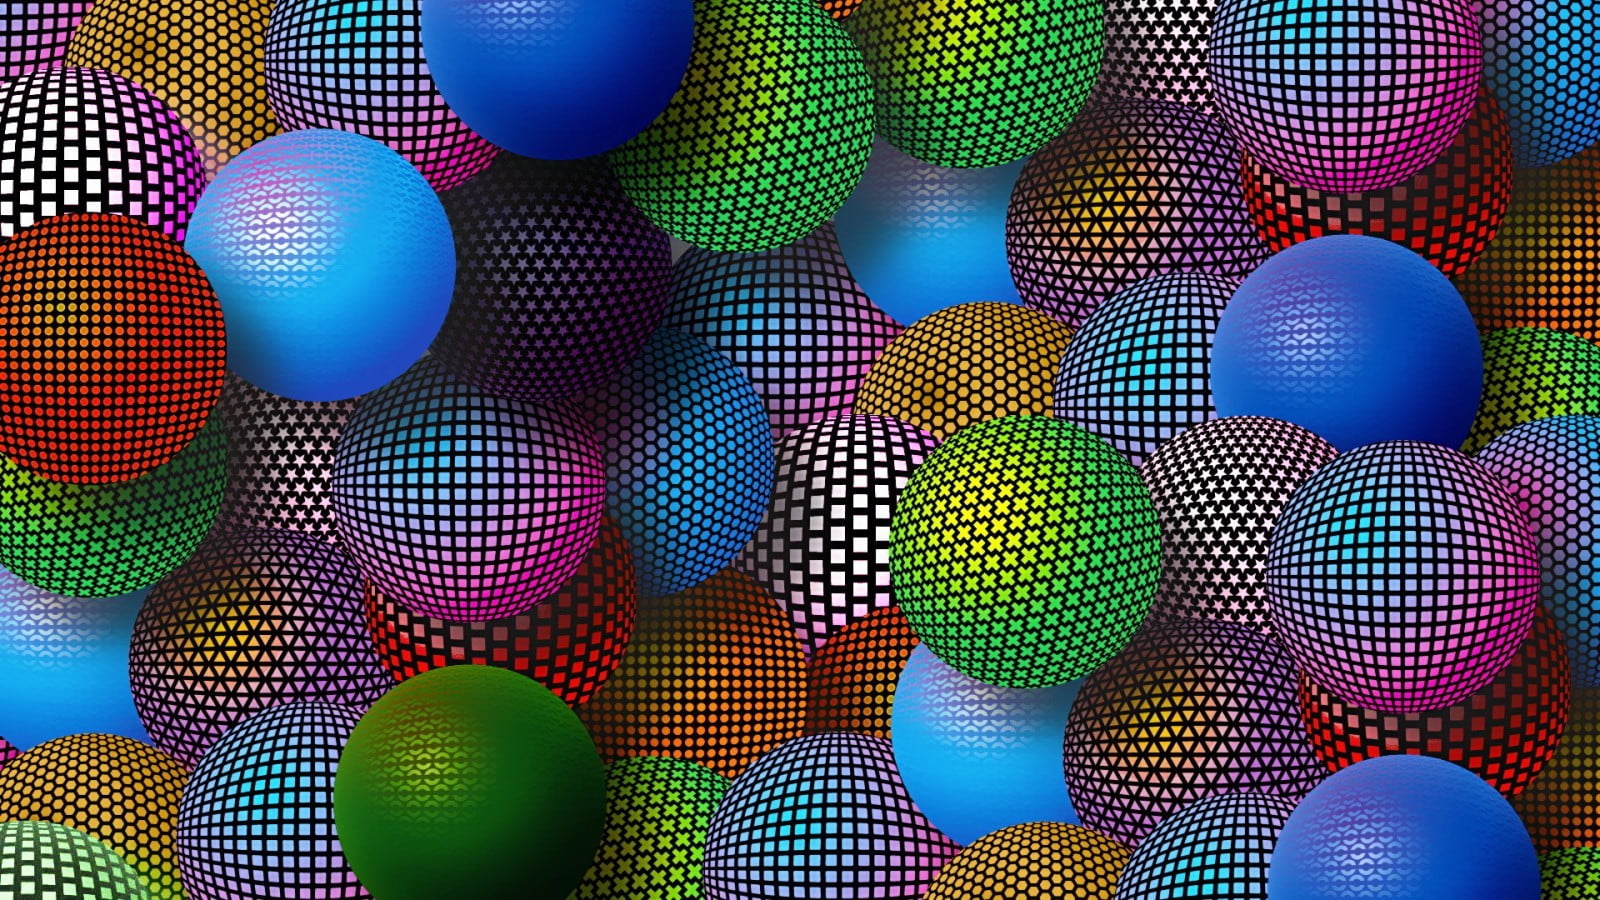 assorted-color ball lot, sphere, abstract, digital art, multi colored